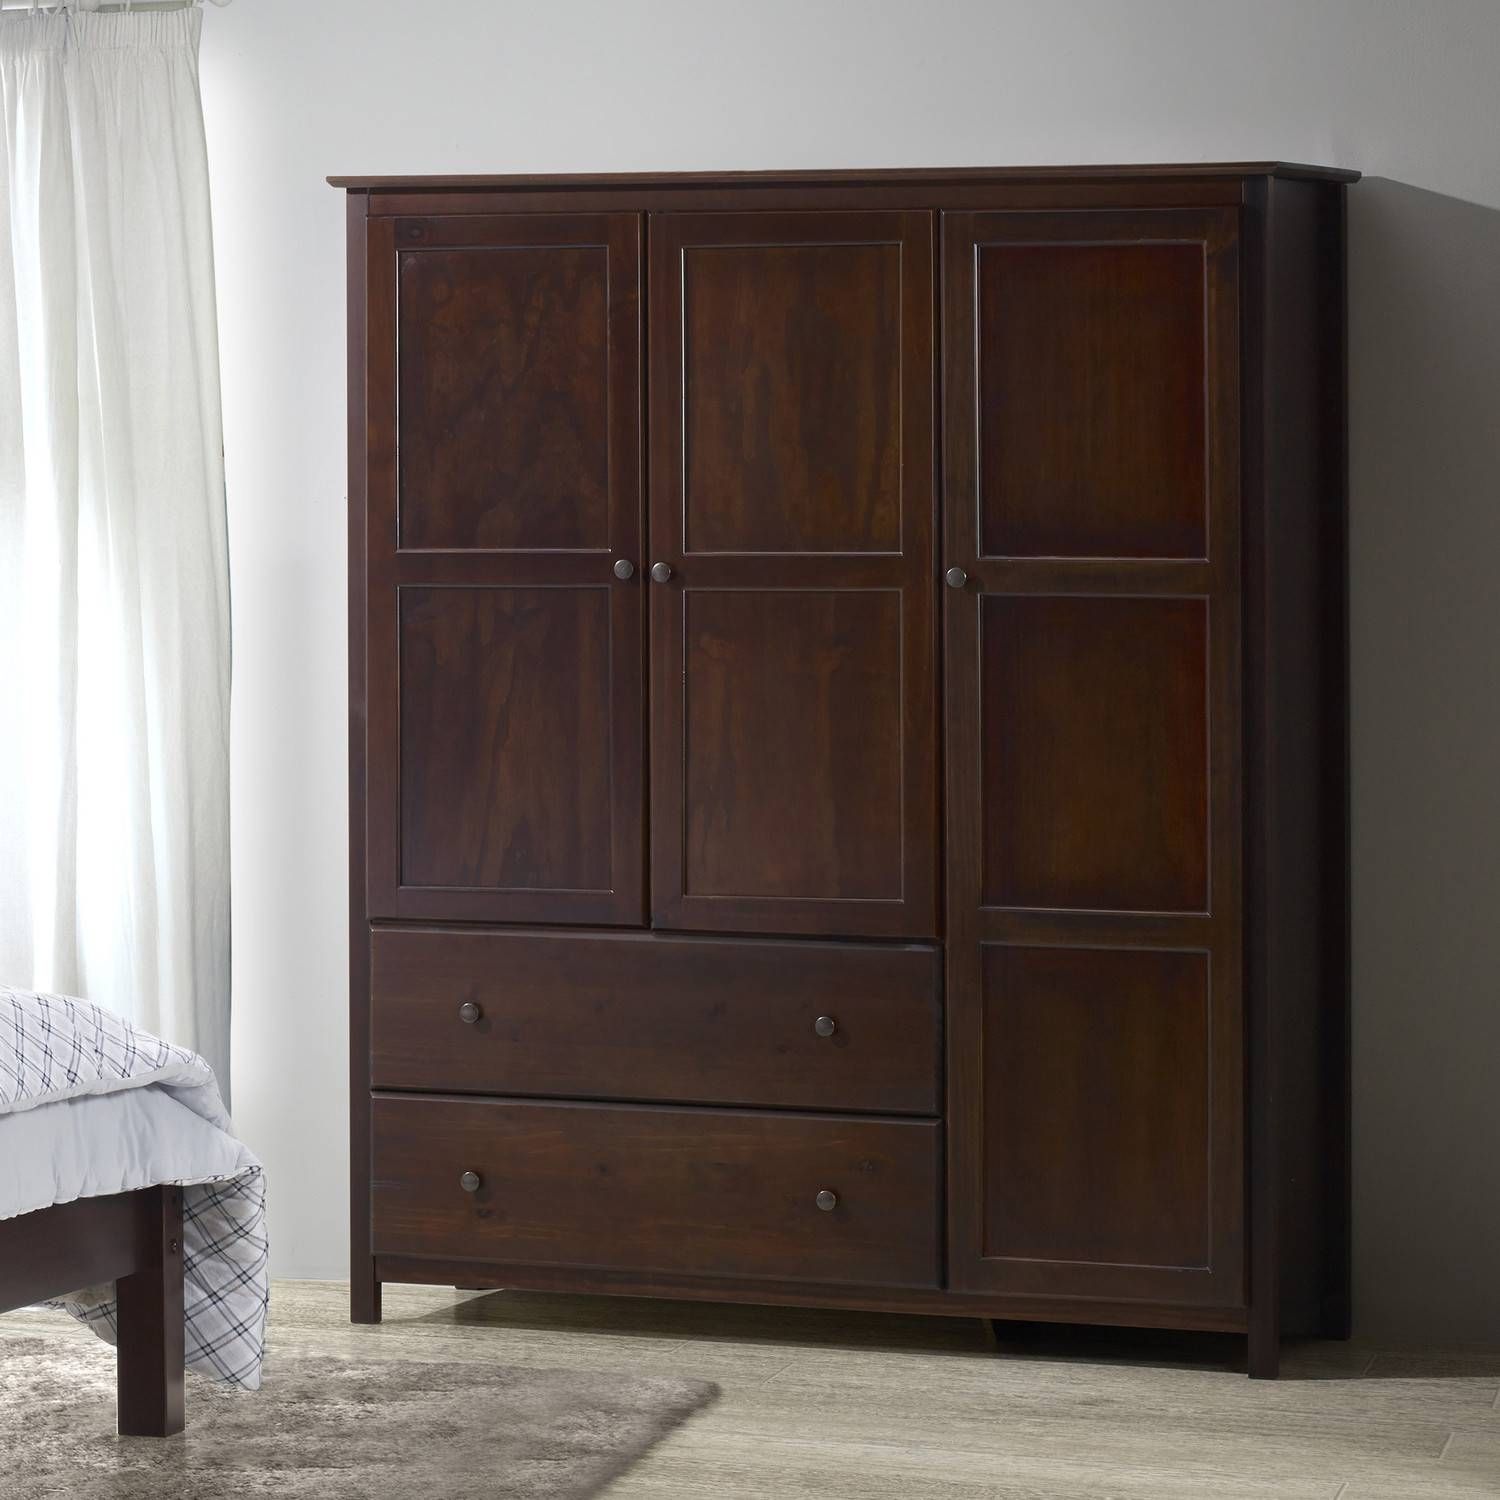 Furniture: Fancy Wardrobe Armoire For Wardrobe Organizer Idea Intended For Black Wood Wardrobes (View 9 of 15)